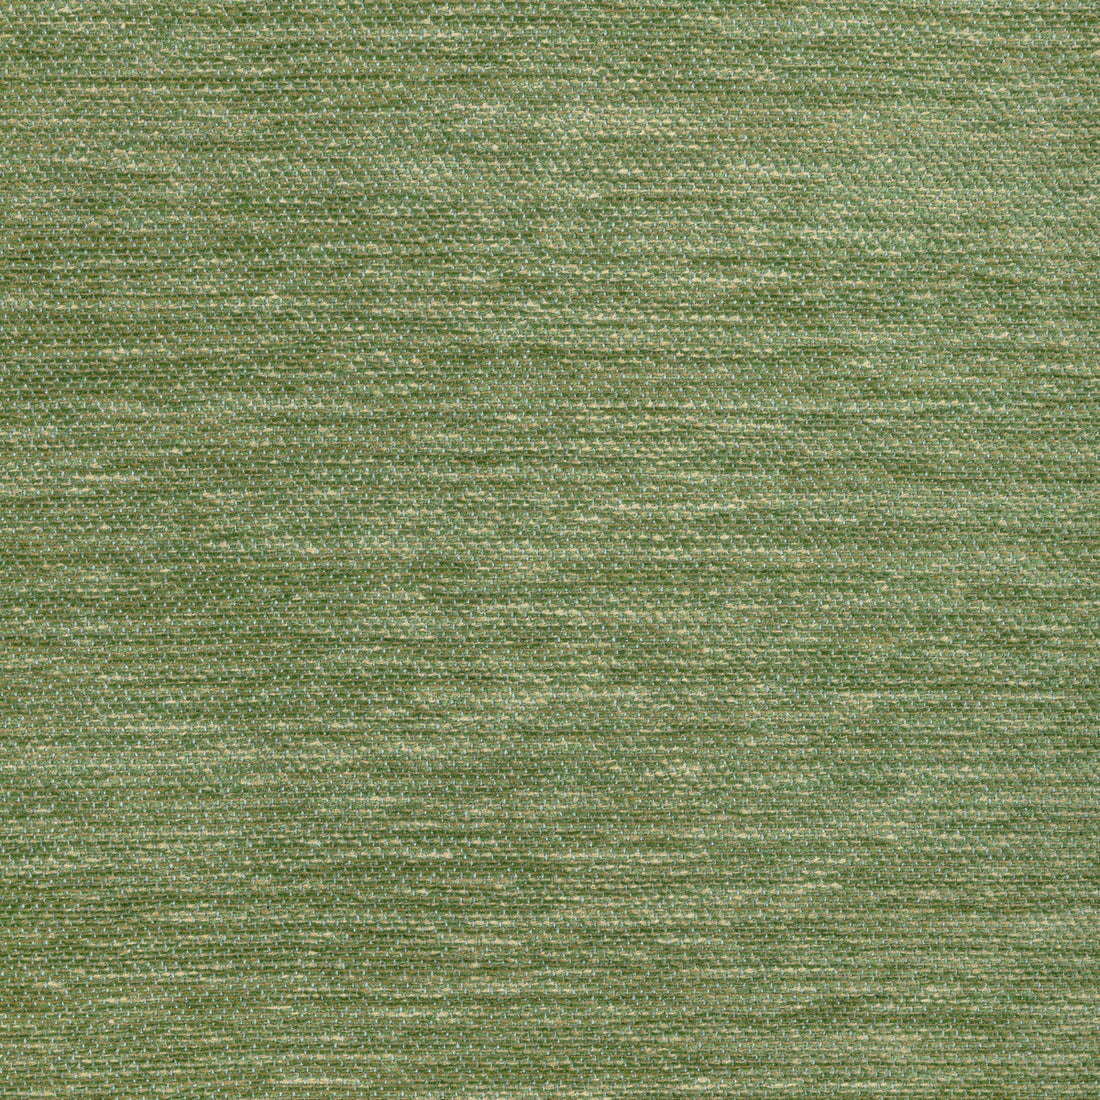 Cognin Texture fabric in green color - pattern 8022126.3.0 - by Brunschwig &amp; Fils in the Chambery Textures III collection